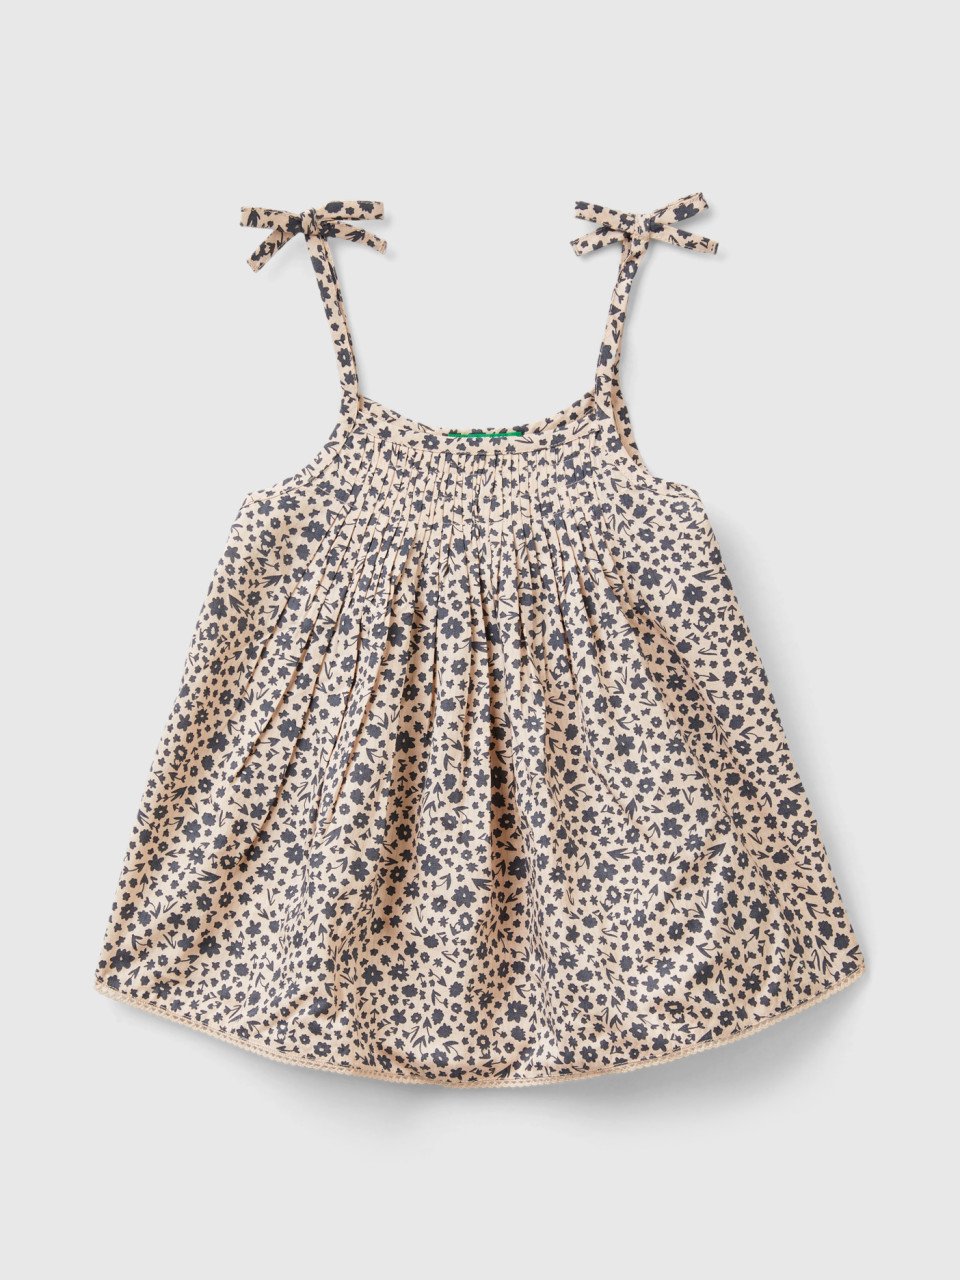 Benetton, Flowy Top With Floral Print, Soft Pink, Kids